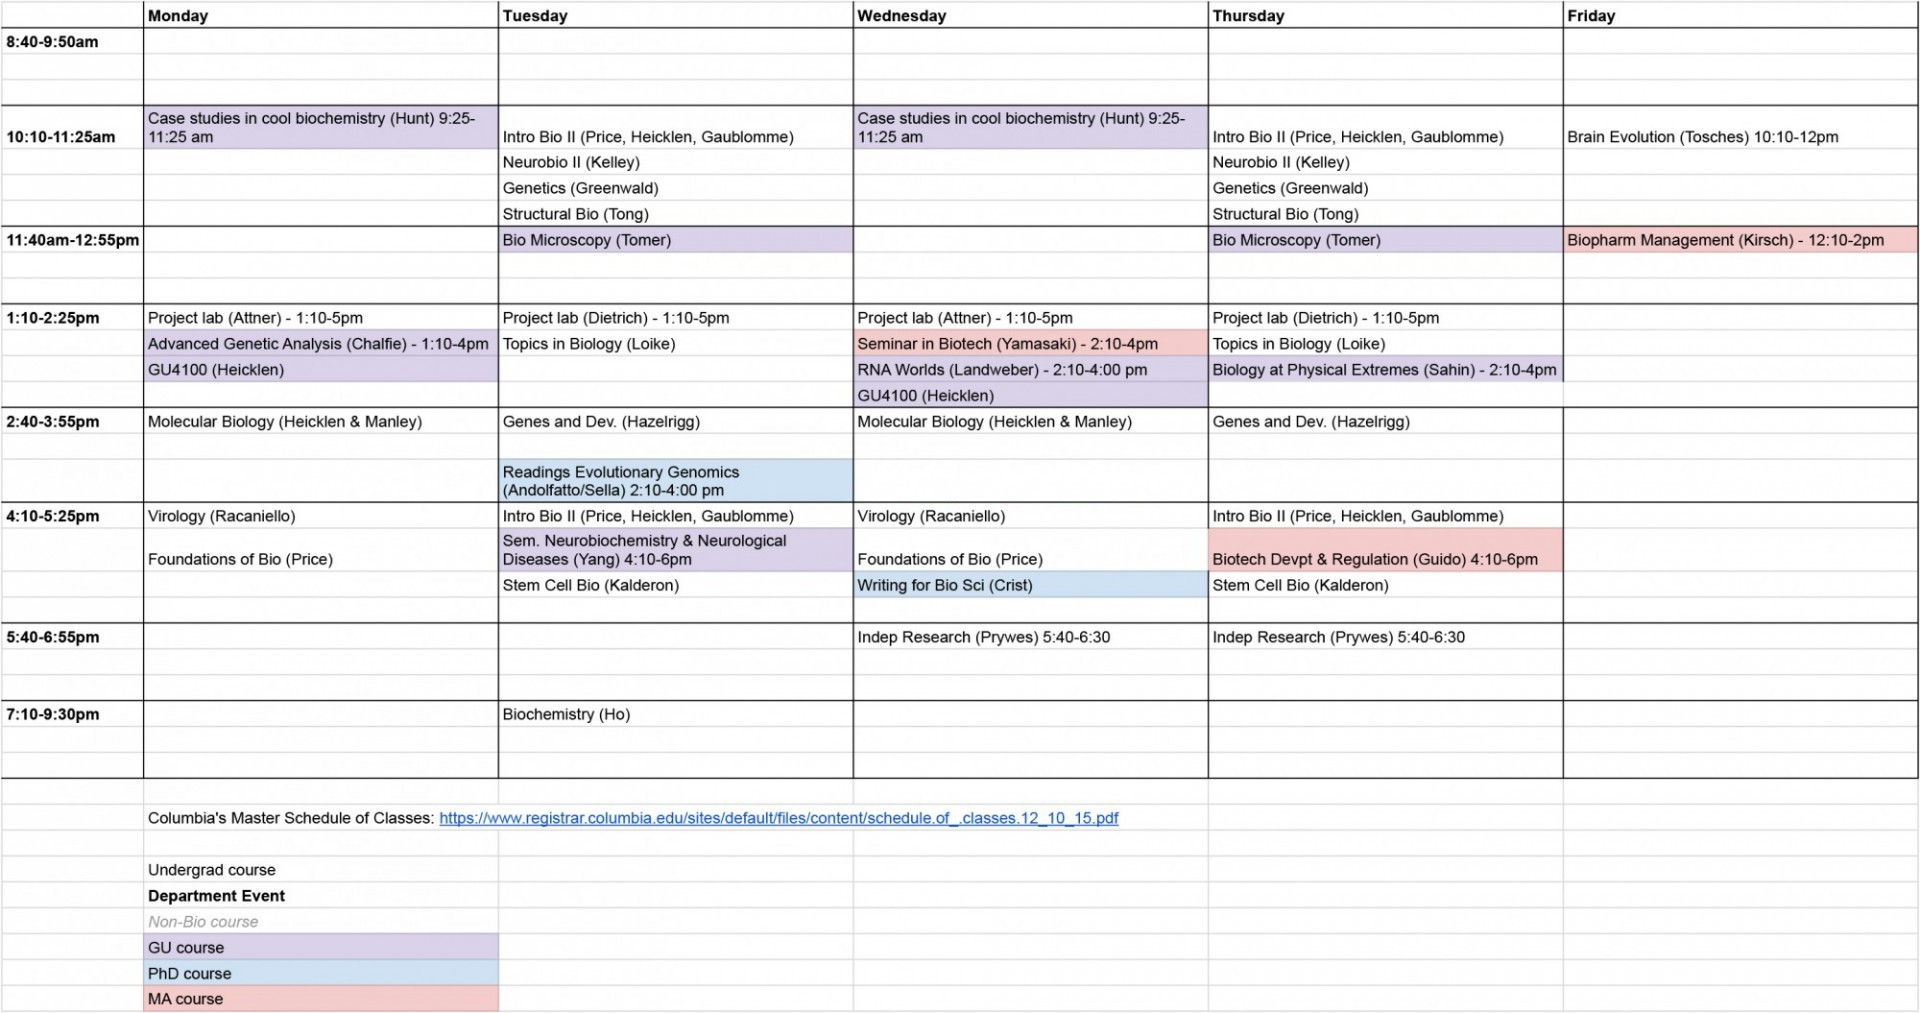 Spring 2023 Course Schedule